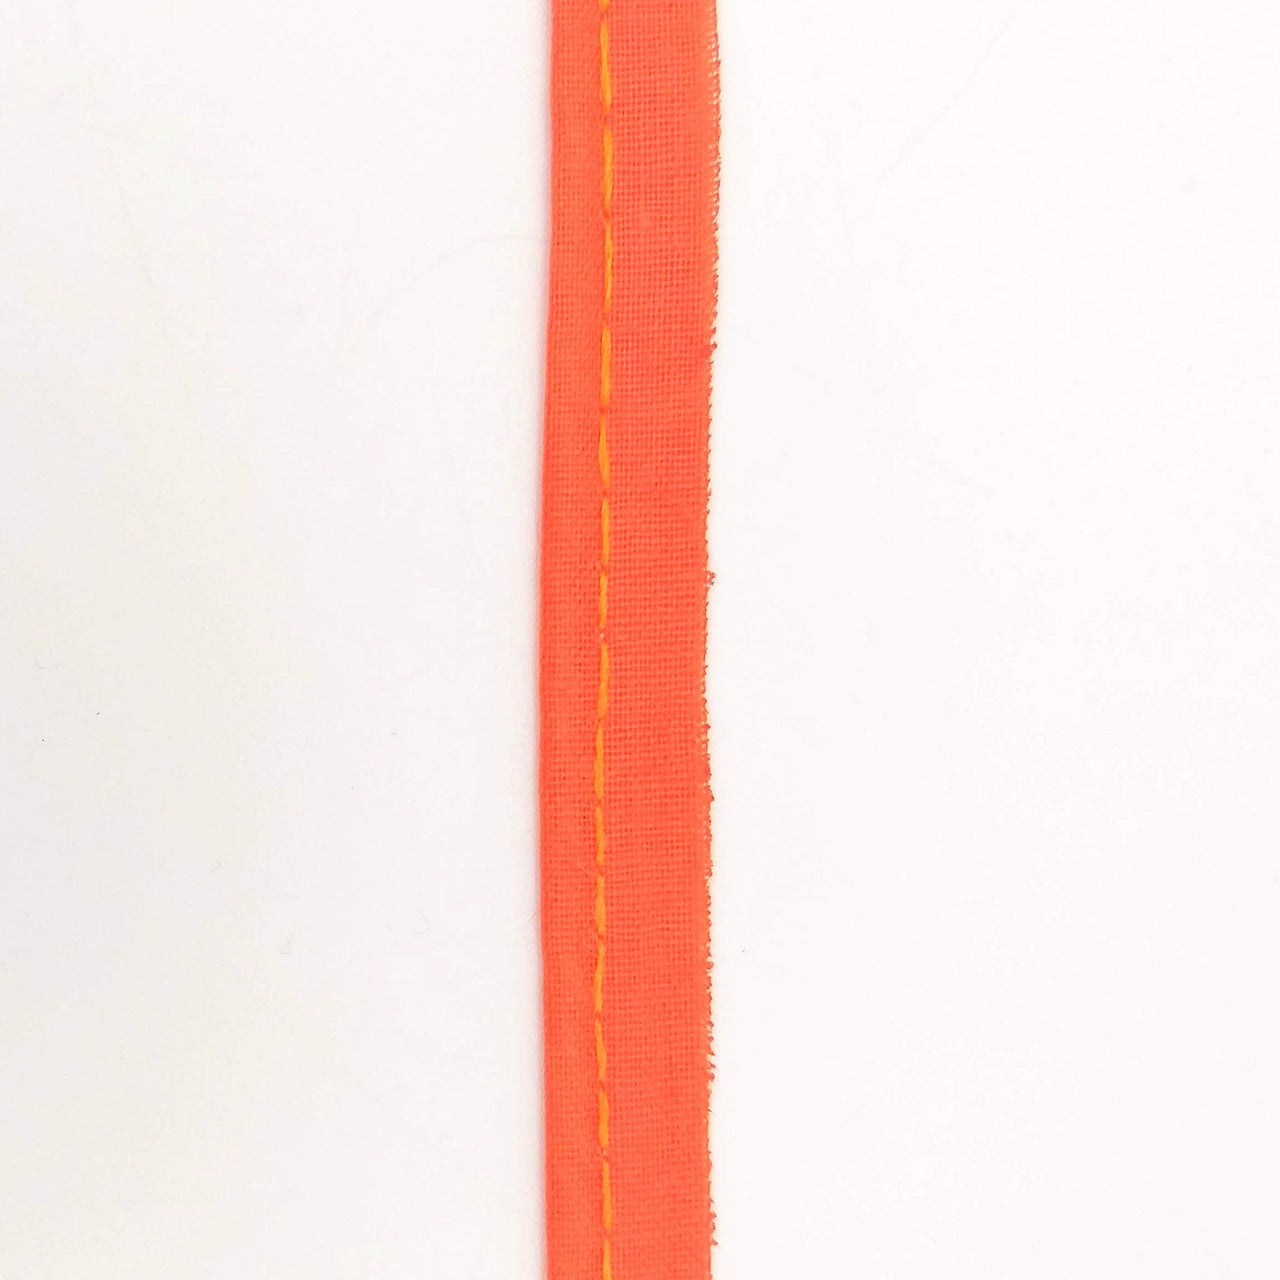 3 Yards, 5mm Flanged Insertion Piping on 10mm Band, Orange Fabric Trim